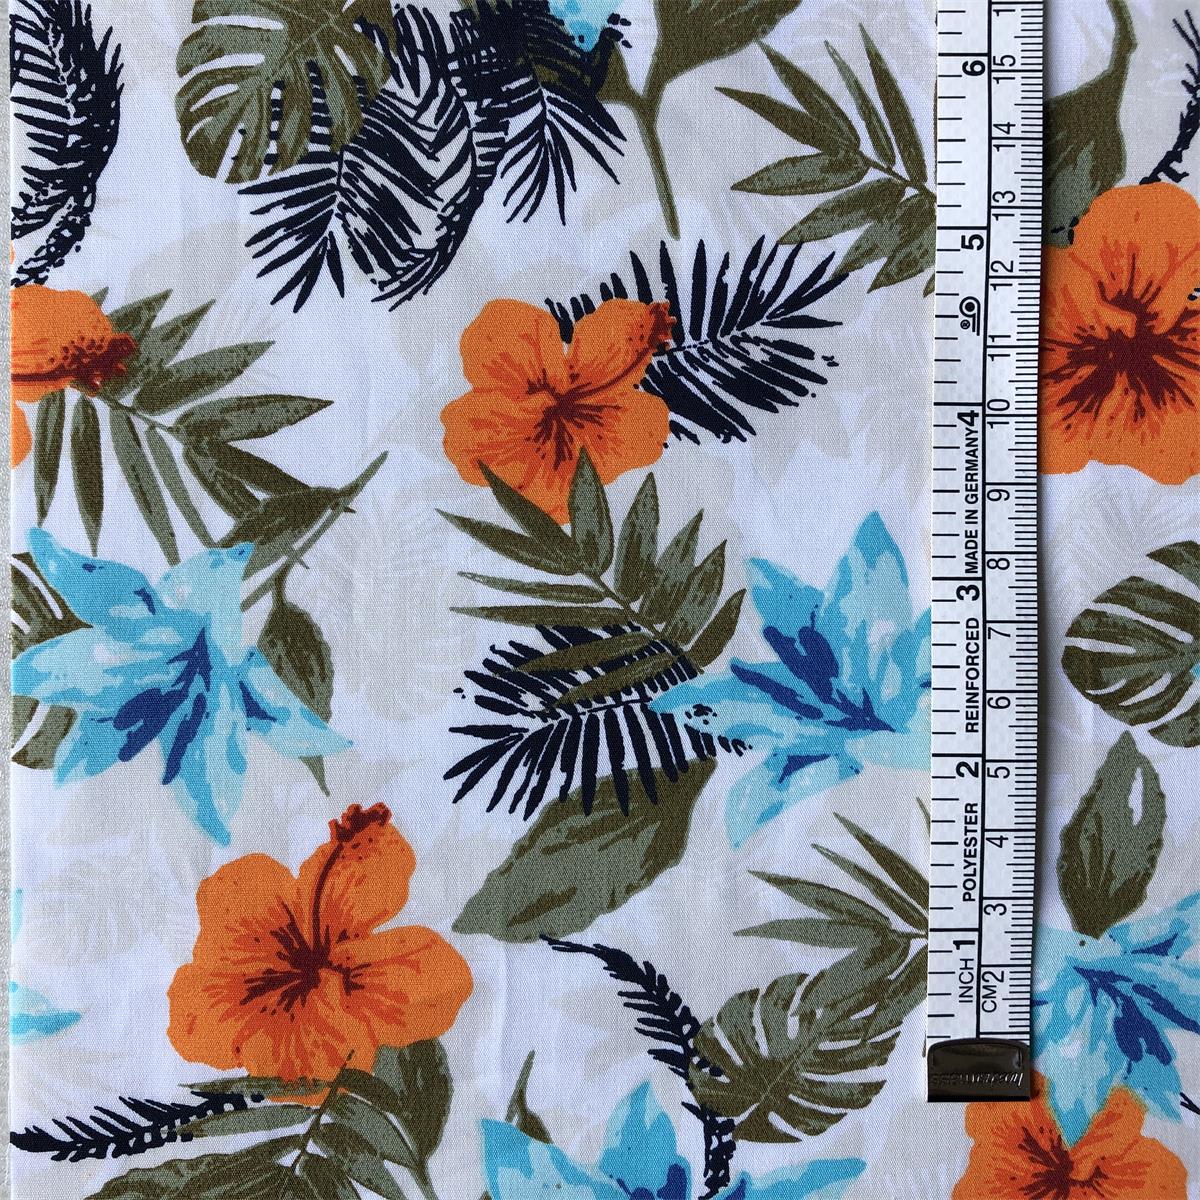 Sun-rising Textile Cotton fabric for men's casual shirts cotton poplin printed shirts woven fabric soft touch